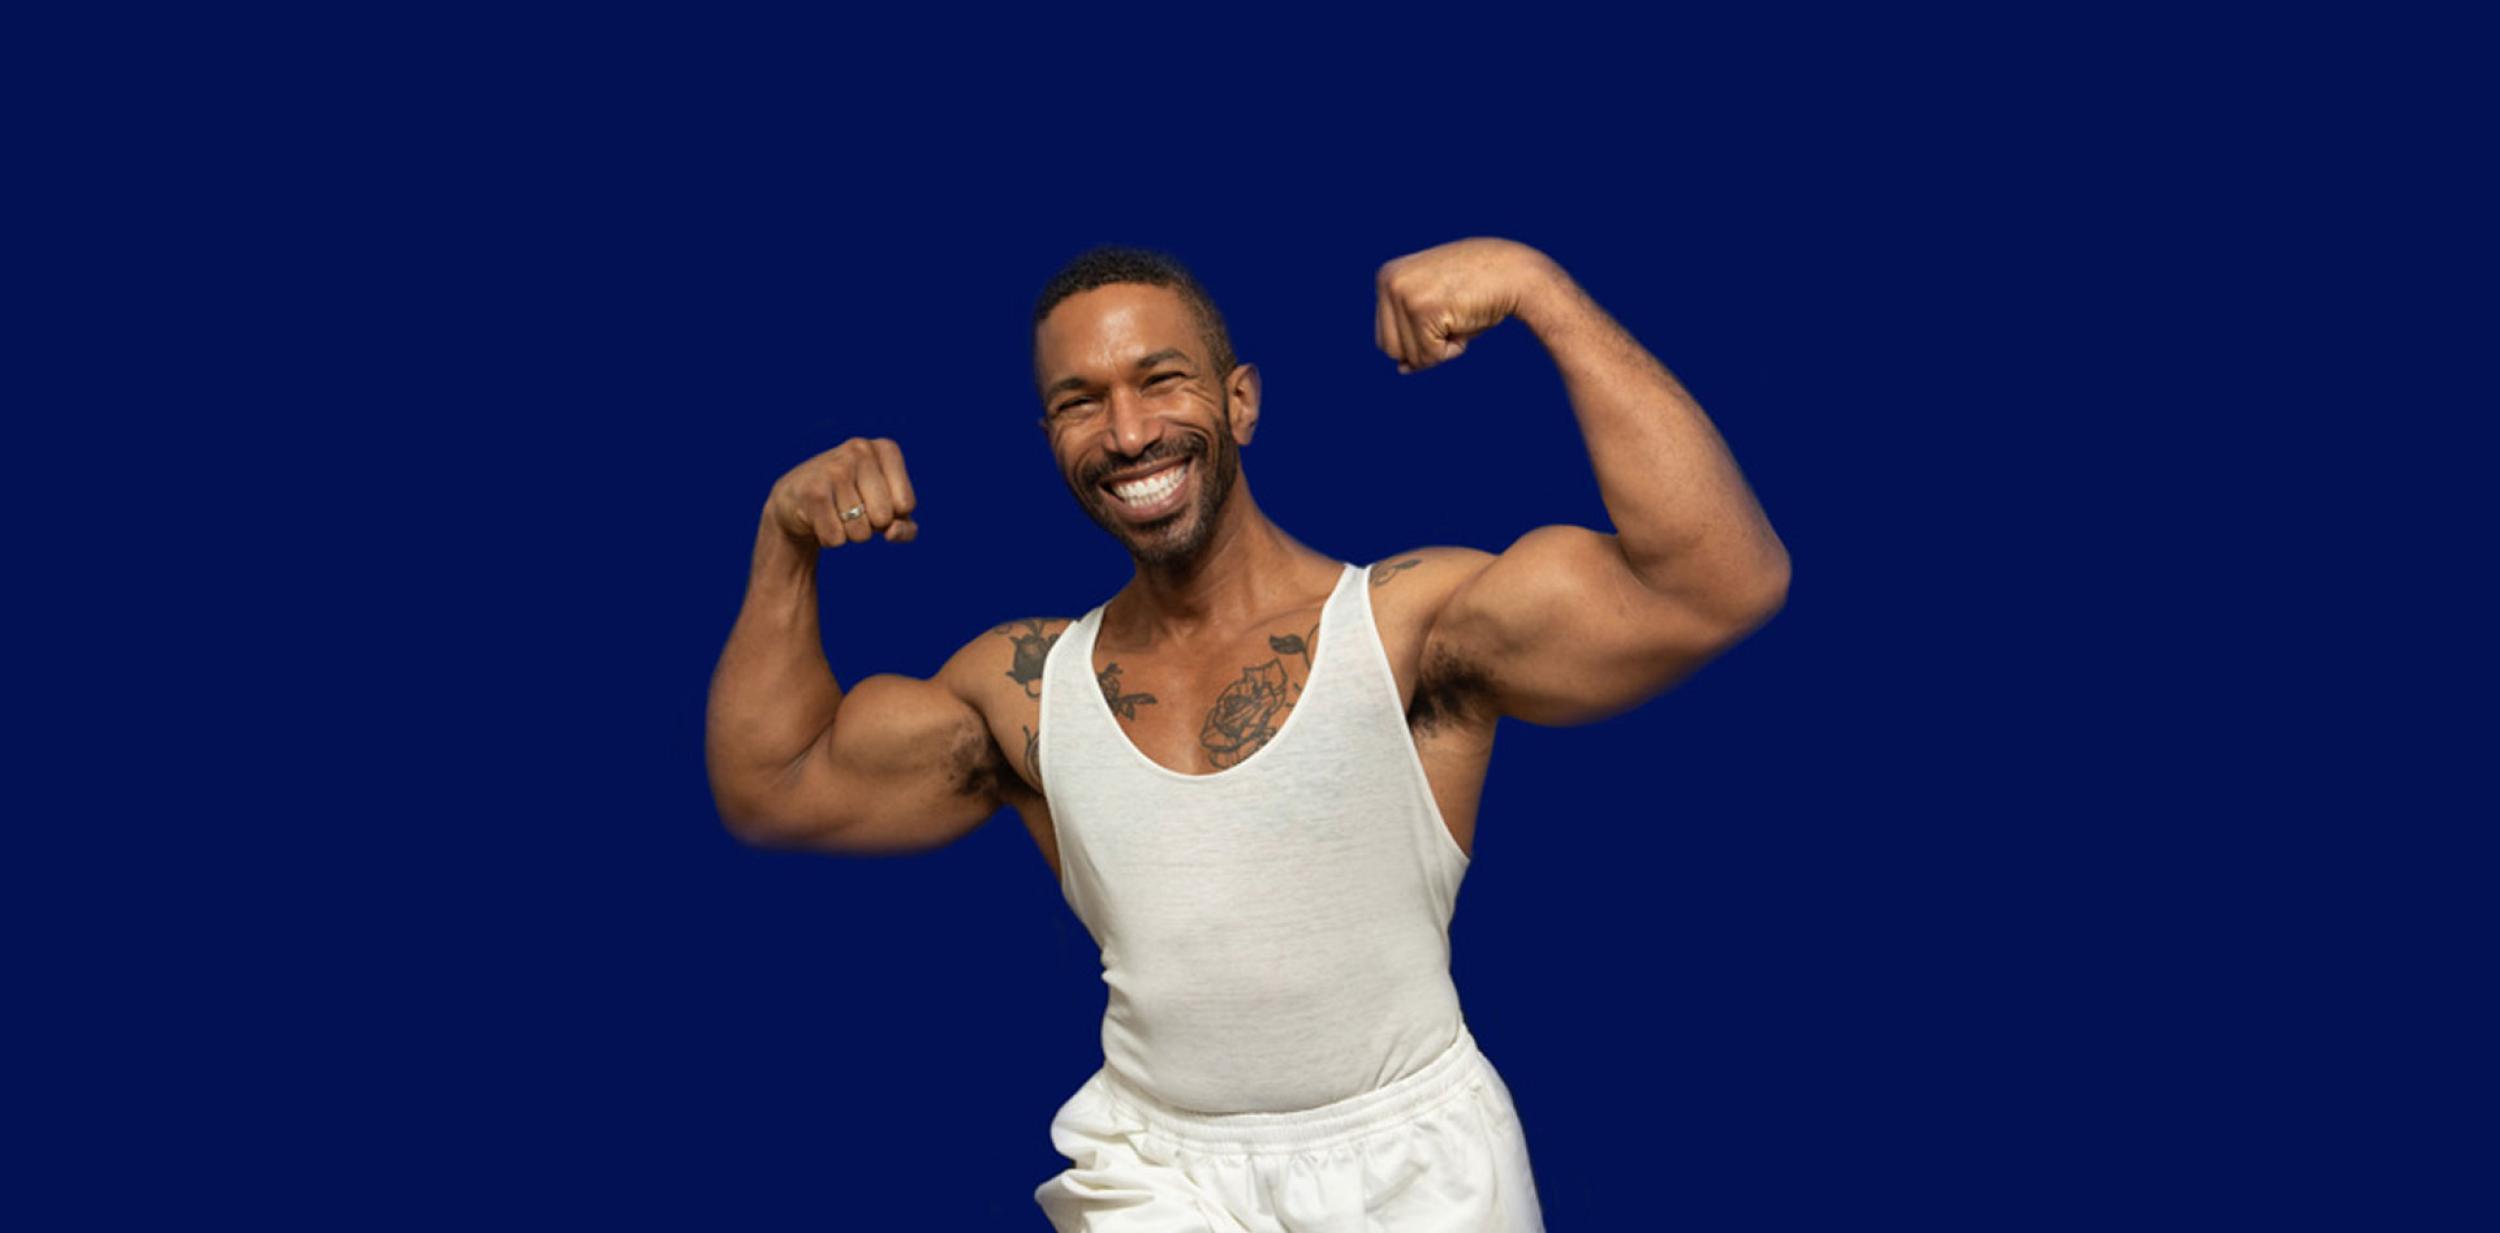 Man wearing a white vest flexing his arm muscles